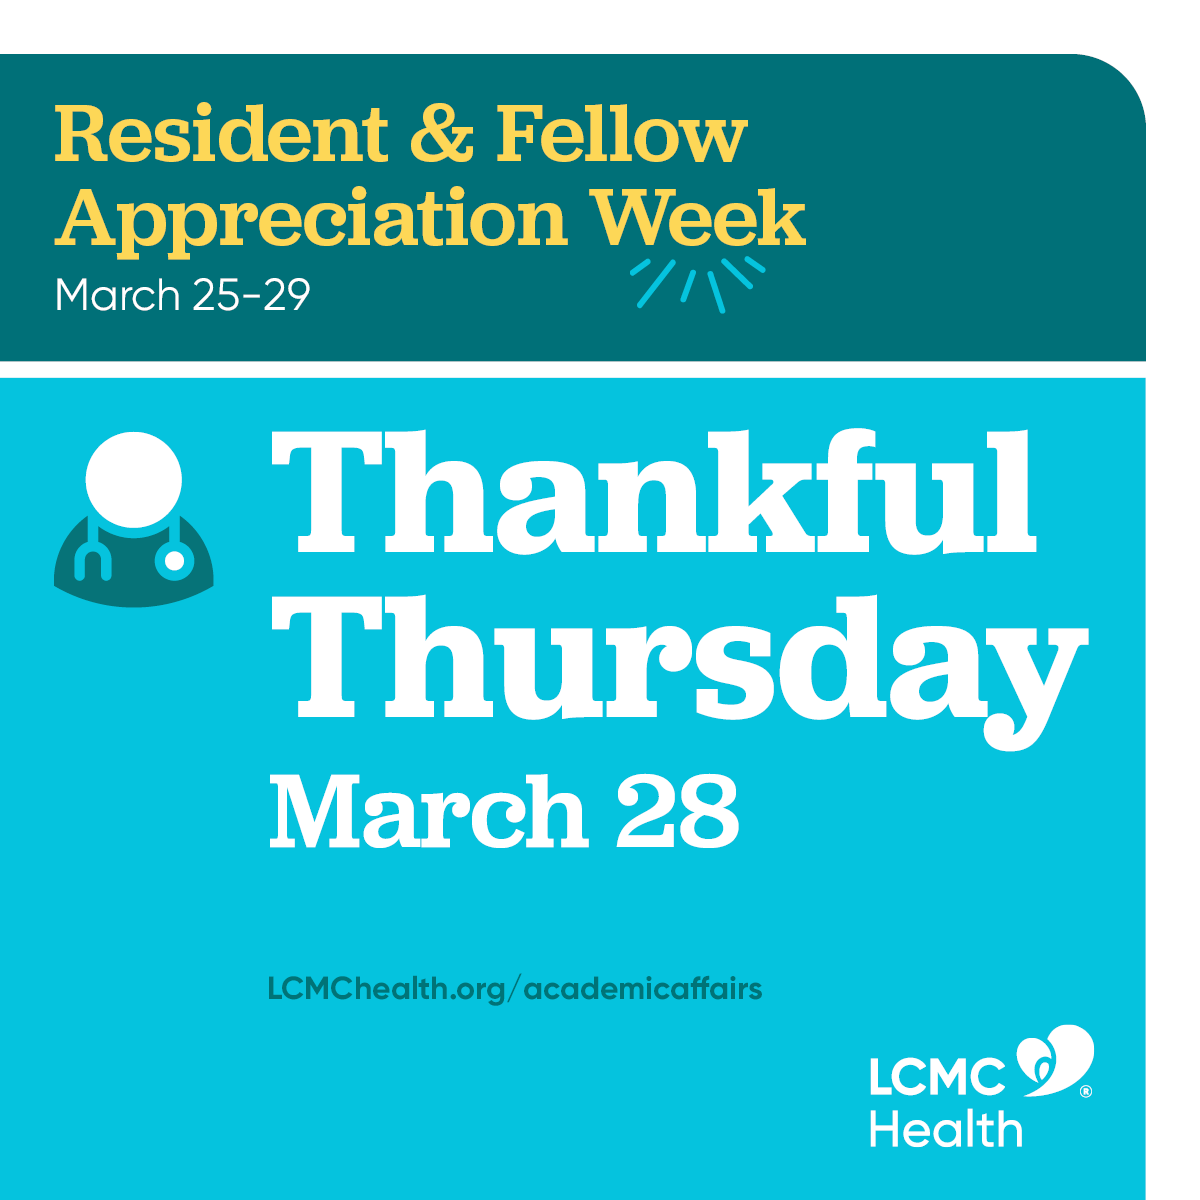 It’s Thankful Thursday! We are immensely grateful for our @LCMCHealth resident physicians & fellow physicians. We have many different activities happening today. Residents & Fellows, please check your school email for celebration details at the facility of your current rotation.